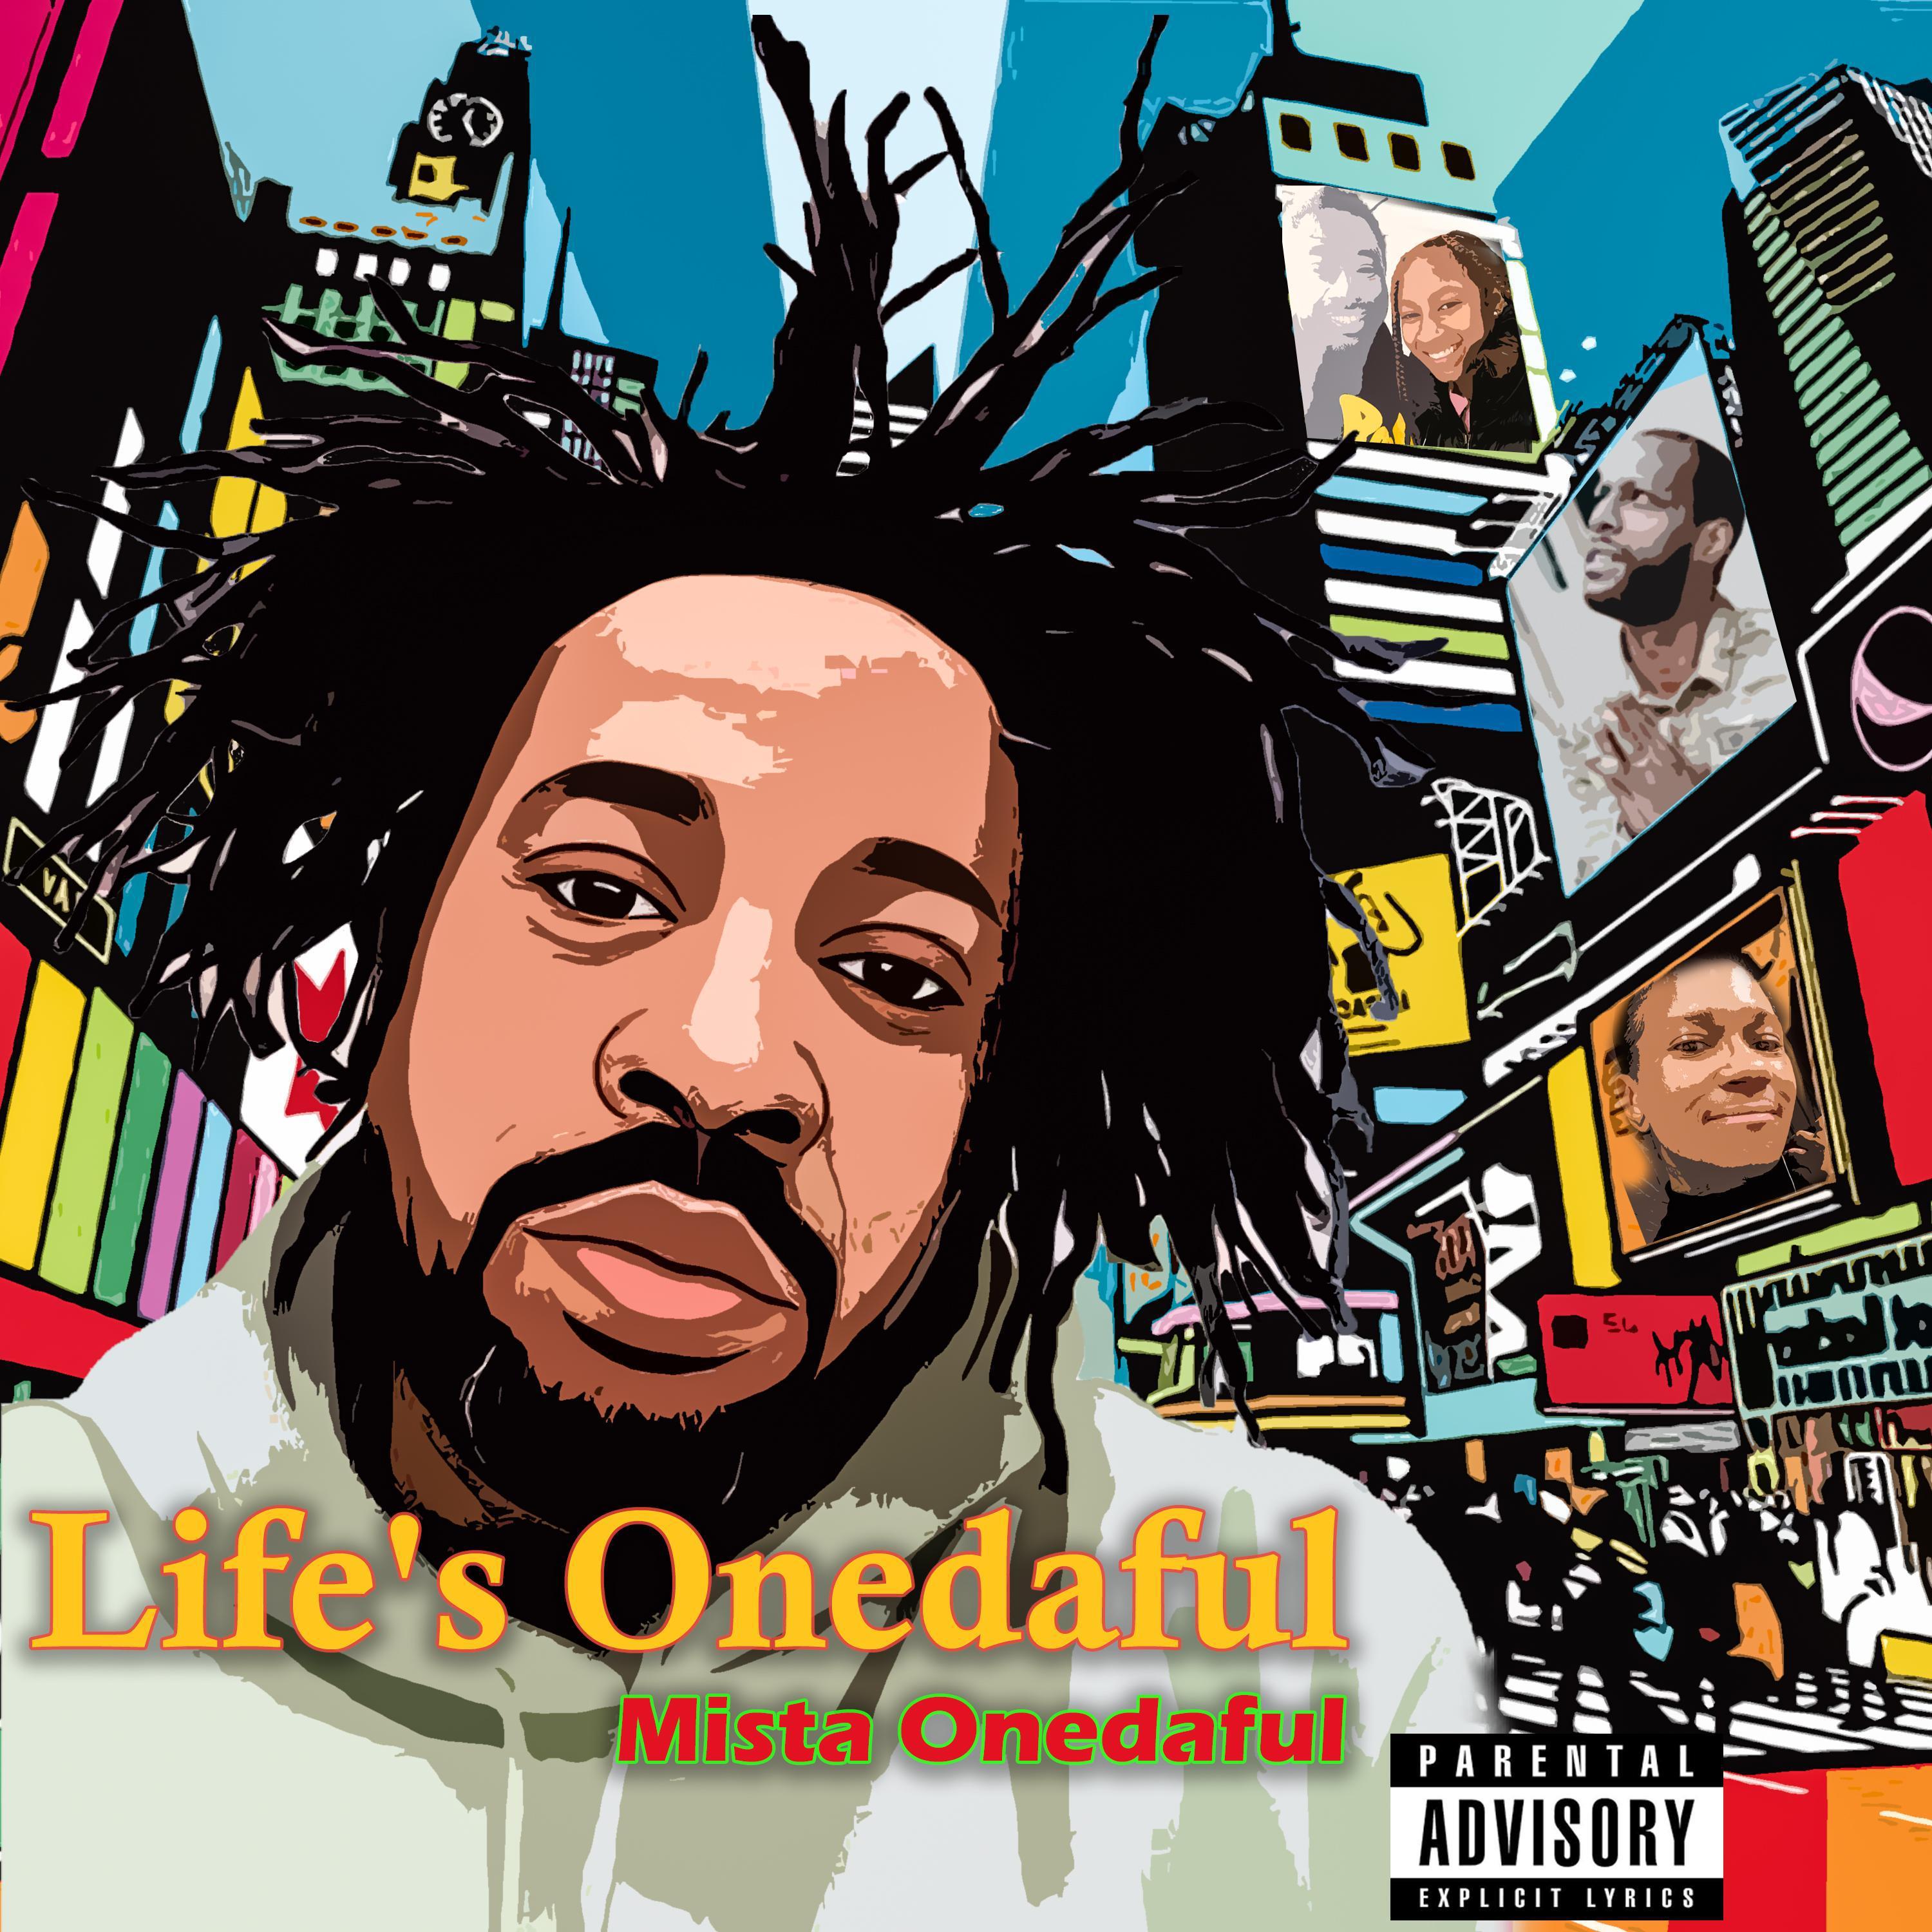 Mista Onedaful - **** wit me (Step up) (feat. Sean Price, Loch & Maestro Lungs)